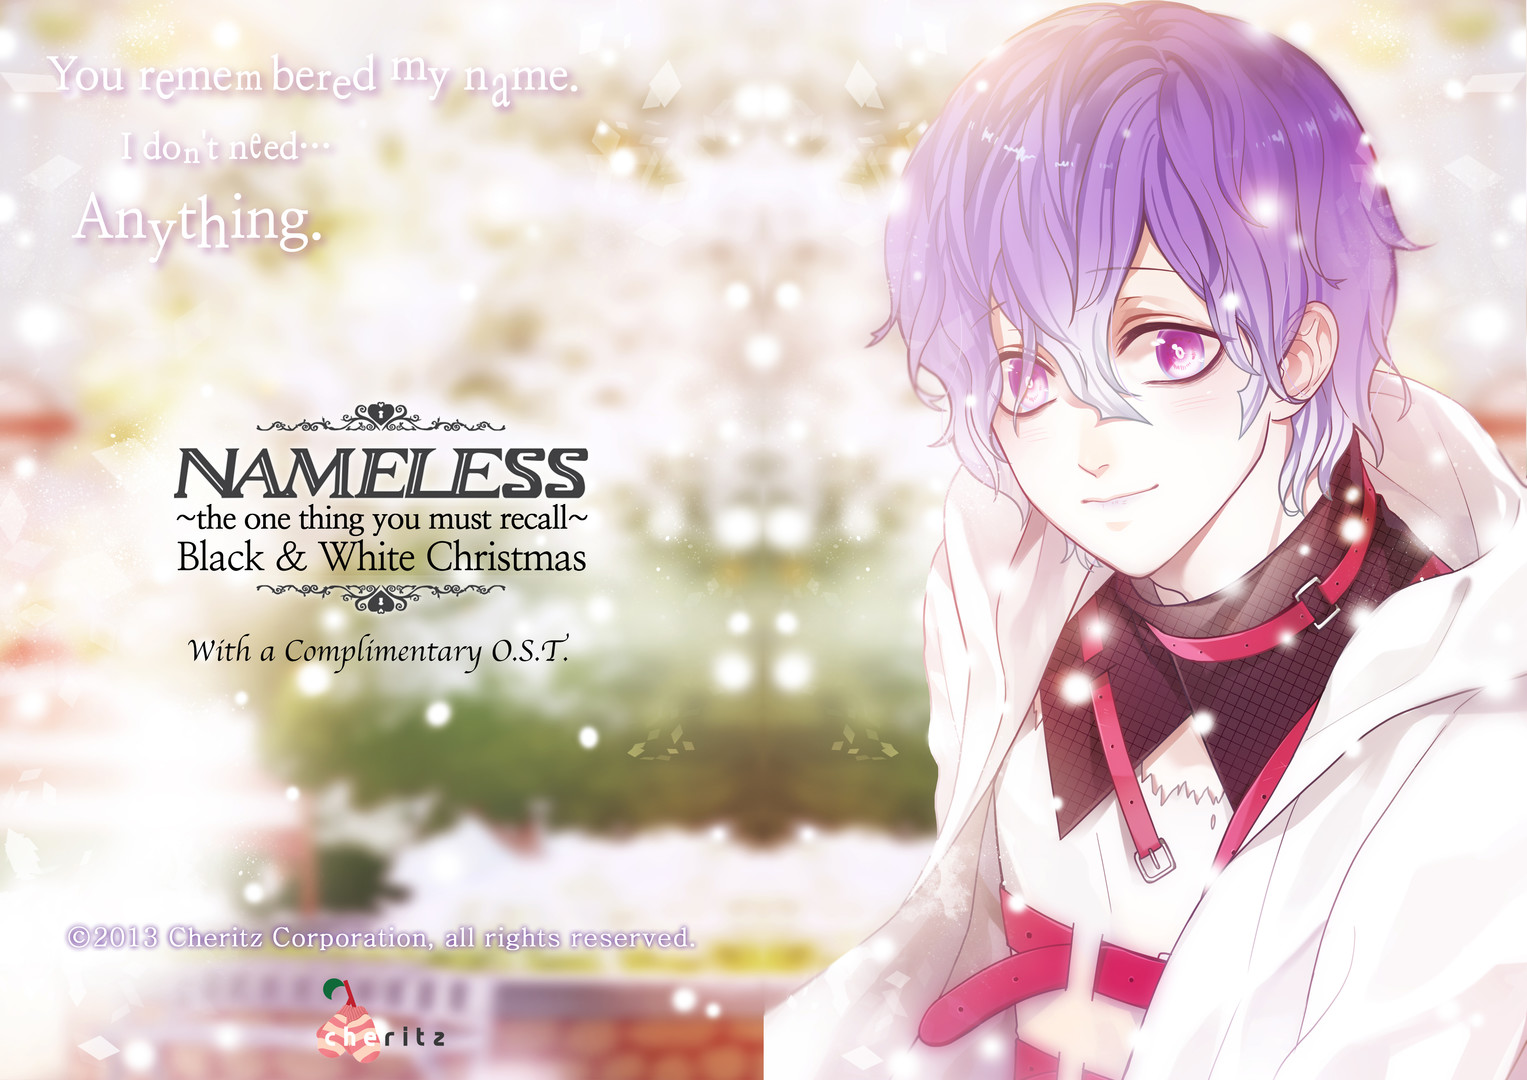 This is the first thing. Nameless cheritz. Nameless ~the one thing you must recall~. Nameless новелла. Cheritz новеллы.